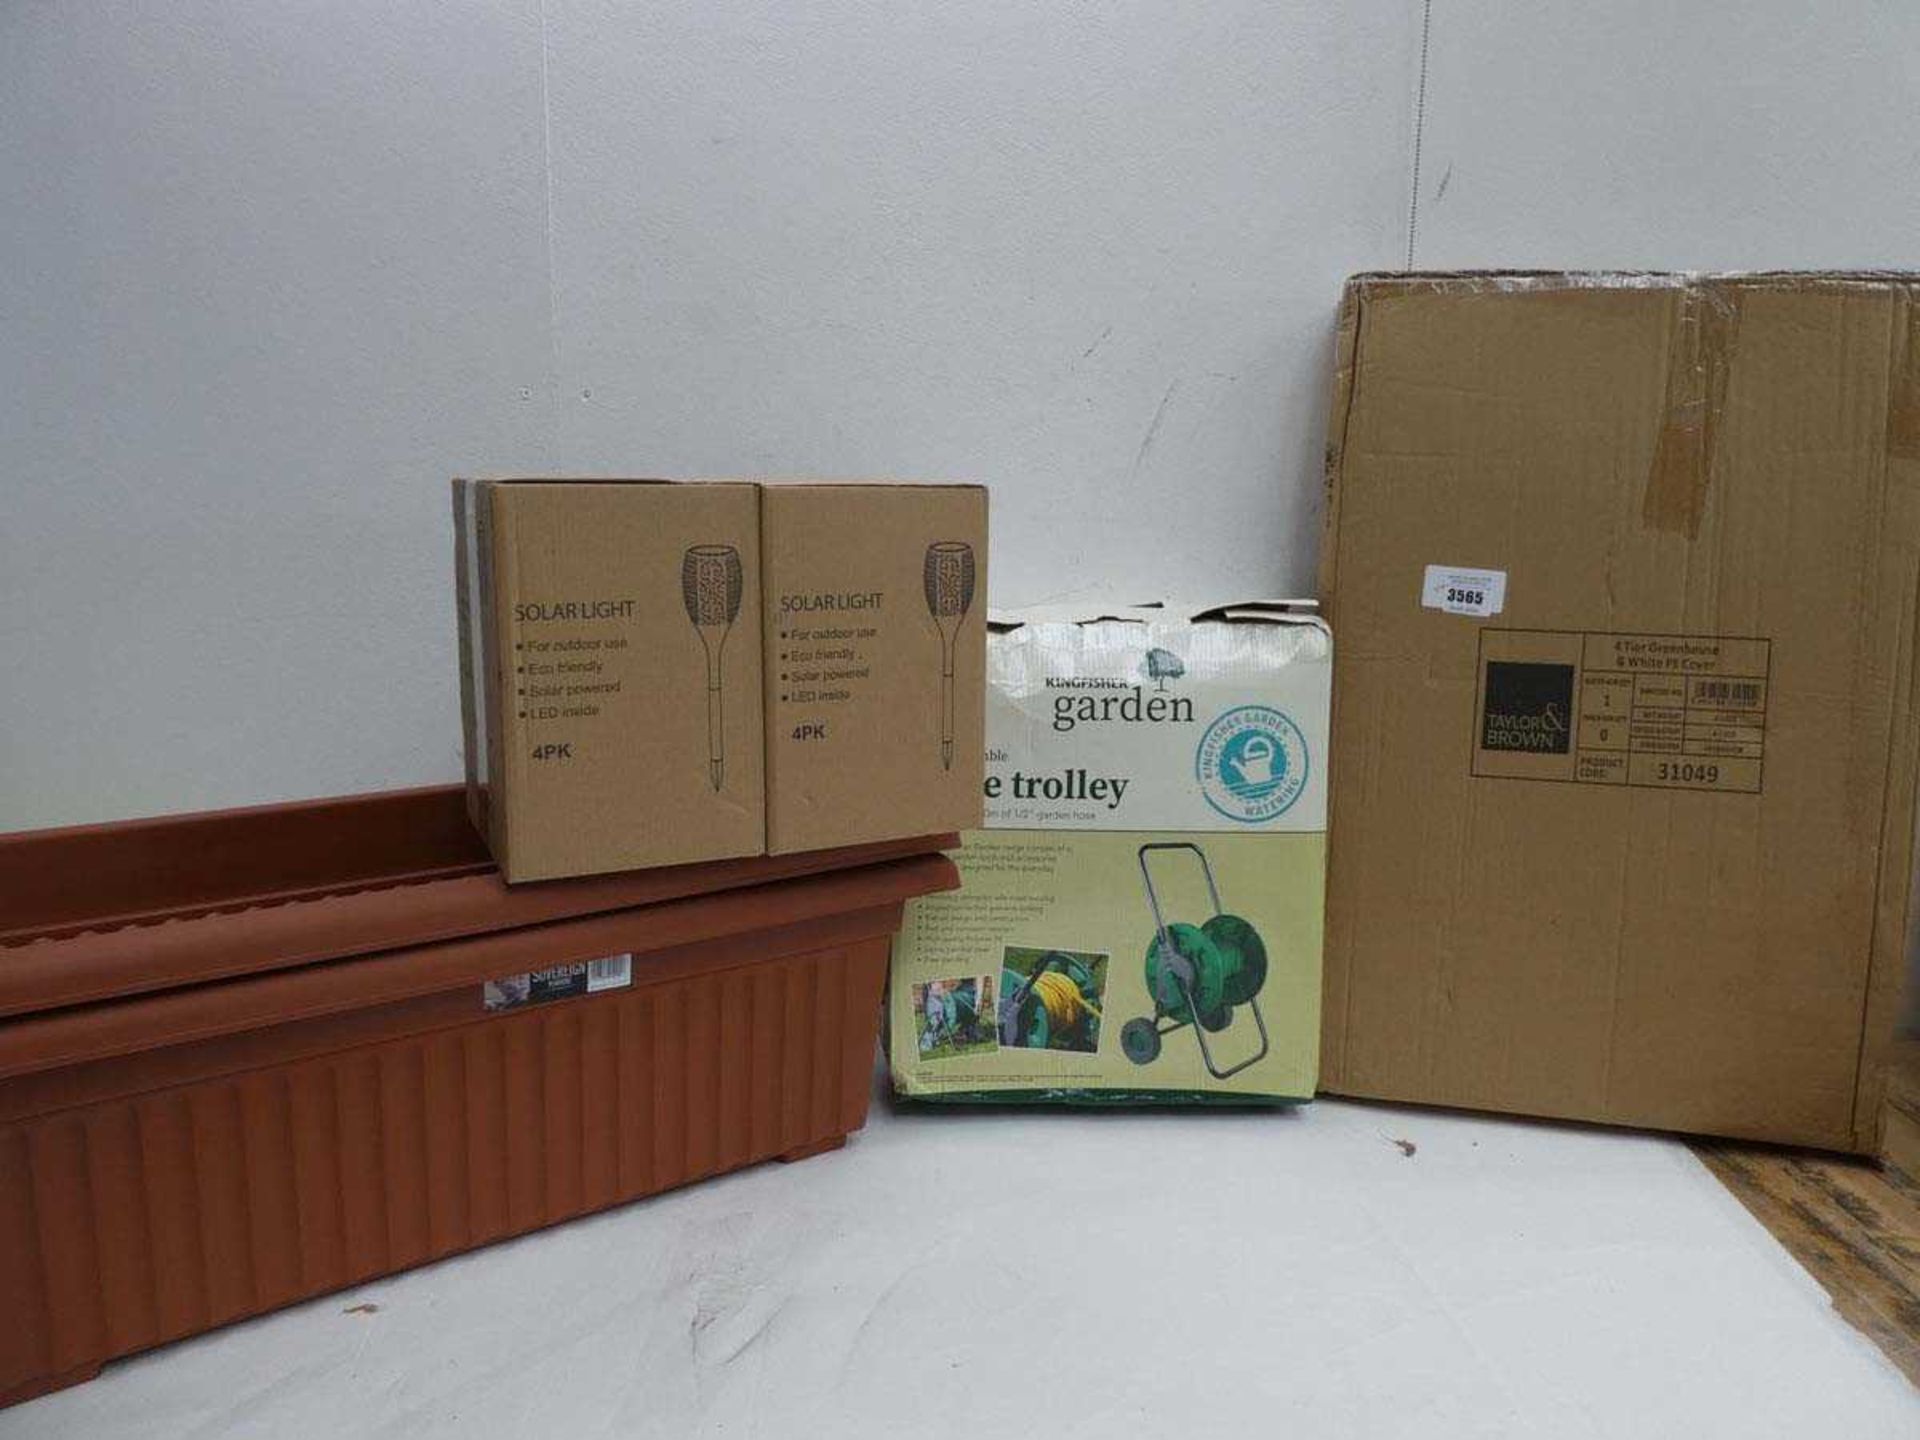 +VAT 4 tier garden greenhouse cover, 2 oblong planters, hose trolley and 2 packs of 4 solar lights